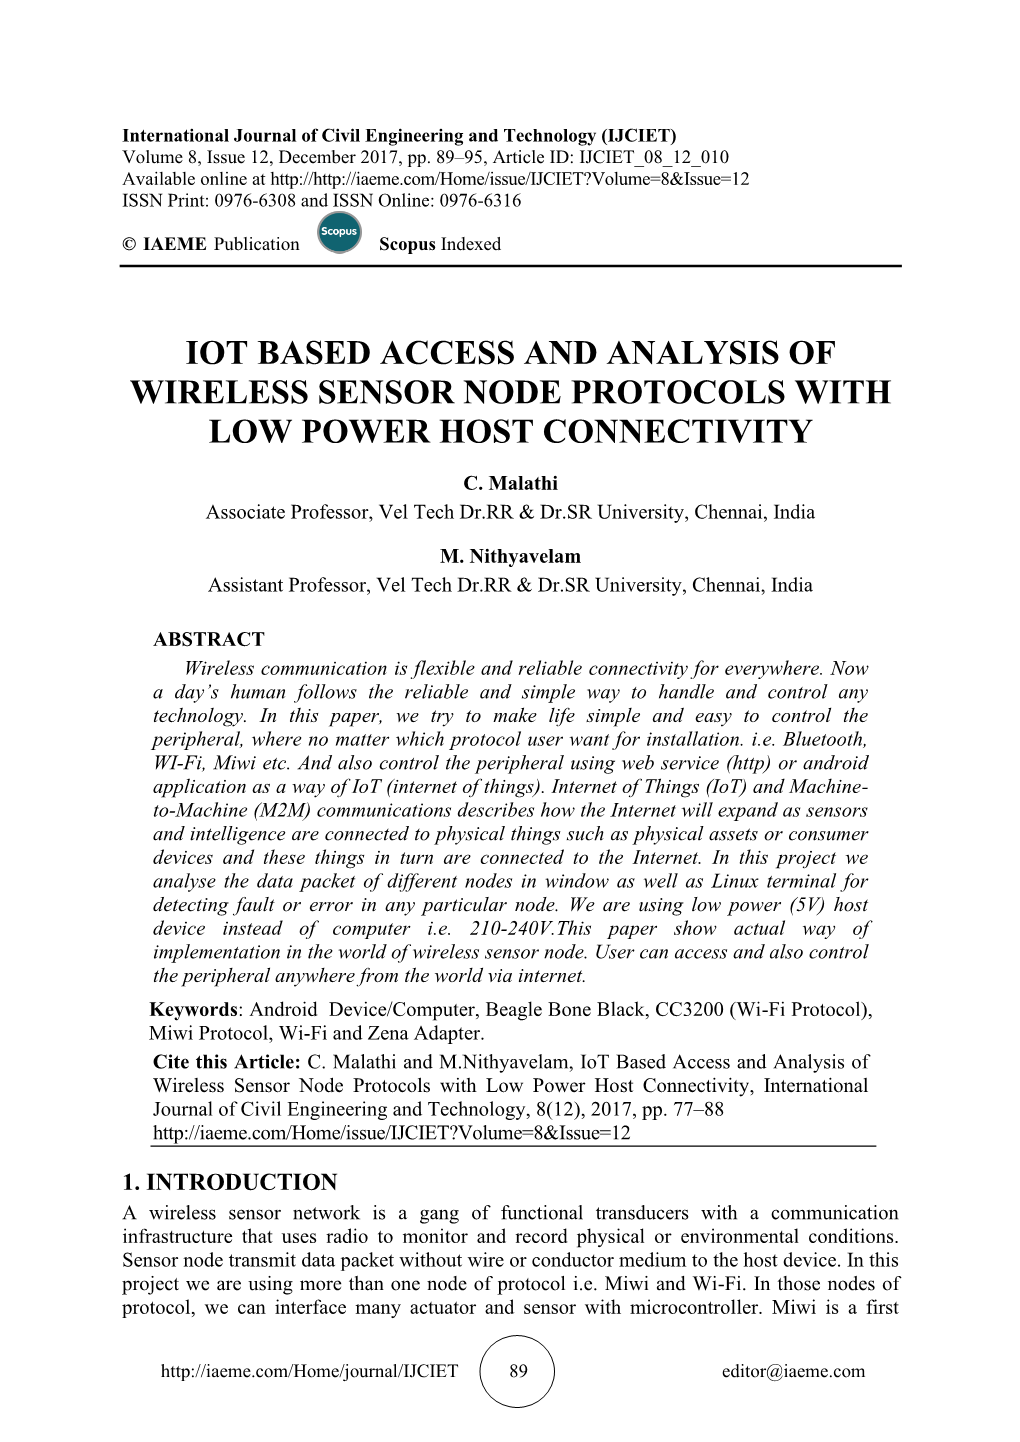 Iot Based Access and Analysis of Wireless Sensor Node Protocols with Low Power Host Connectivity